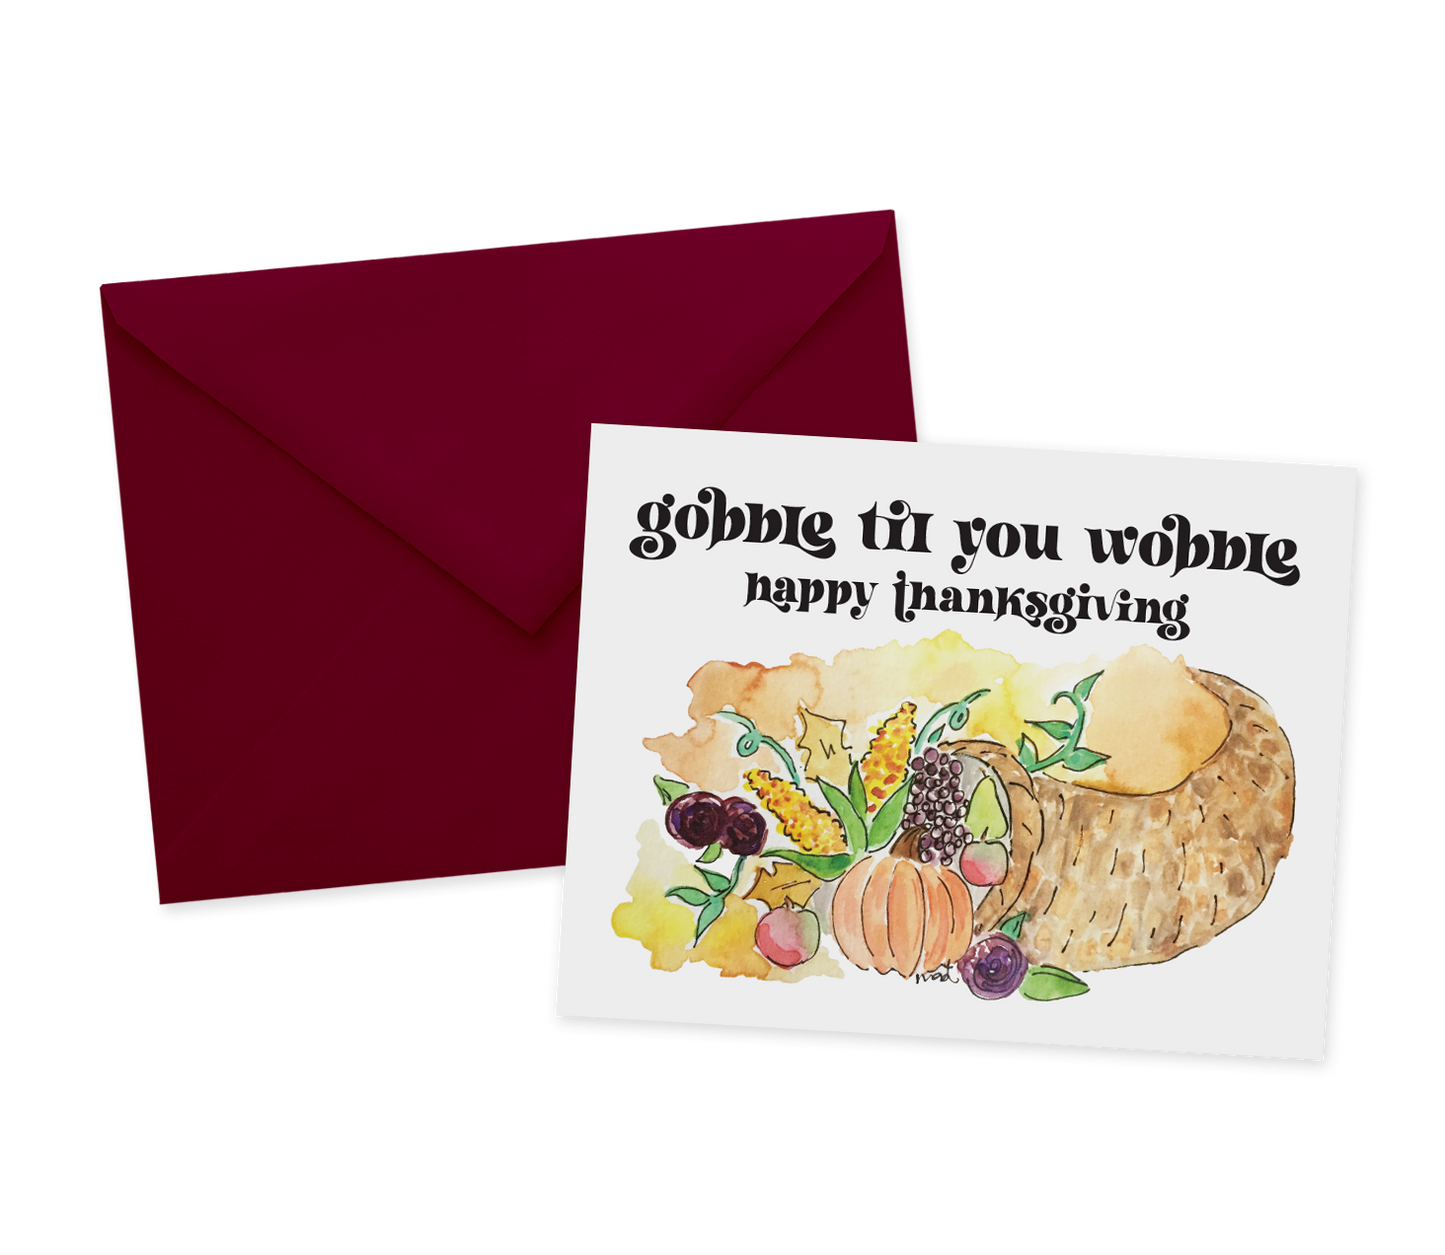 DISCONTINUED Gobble til You Wobble Thanksgiving Greeting Card